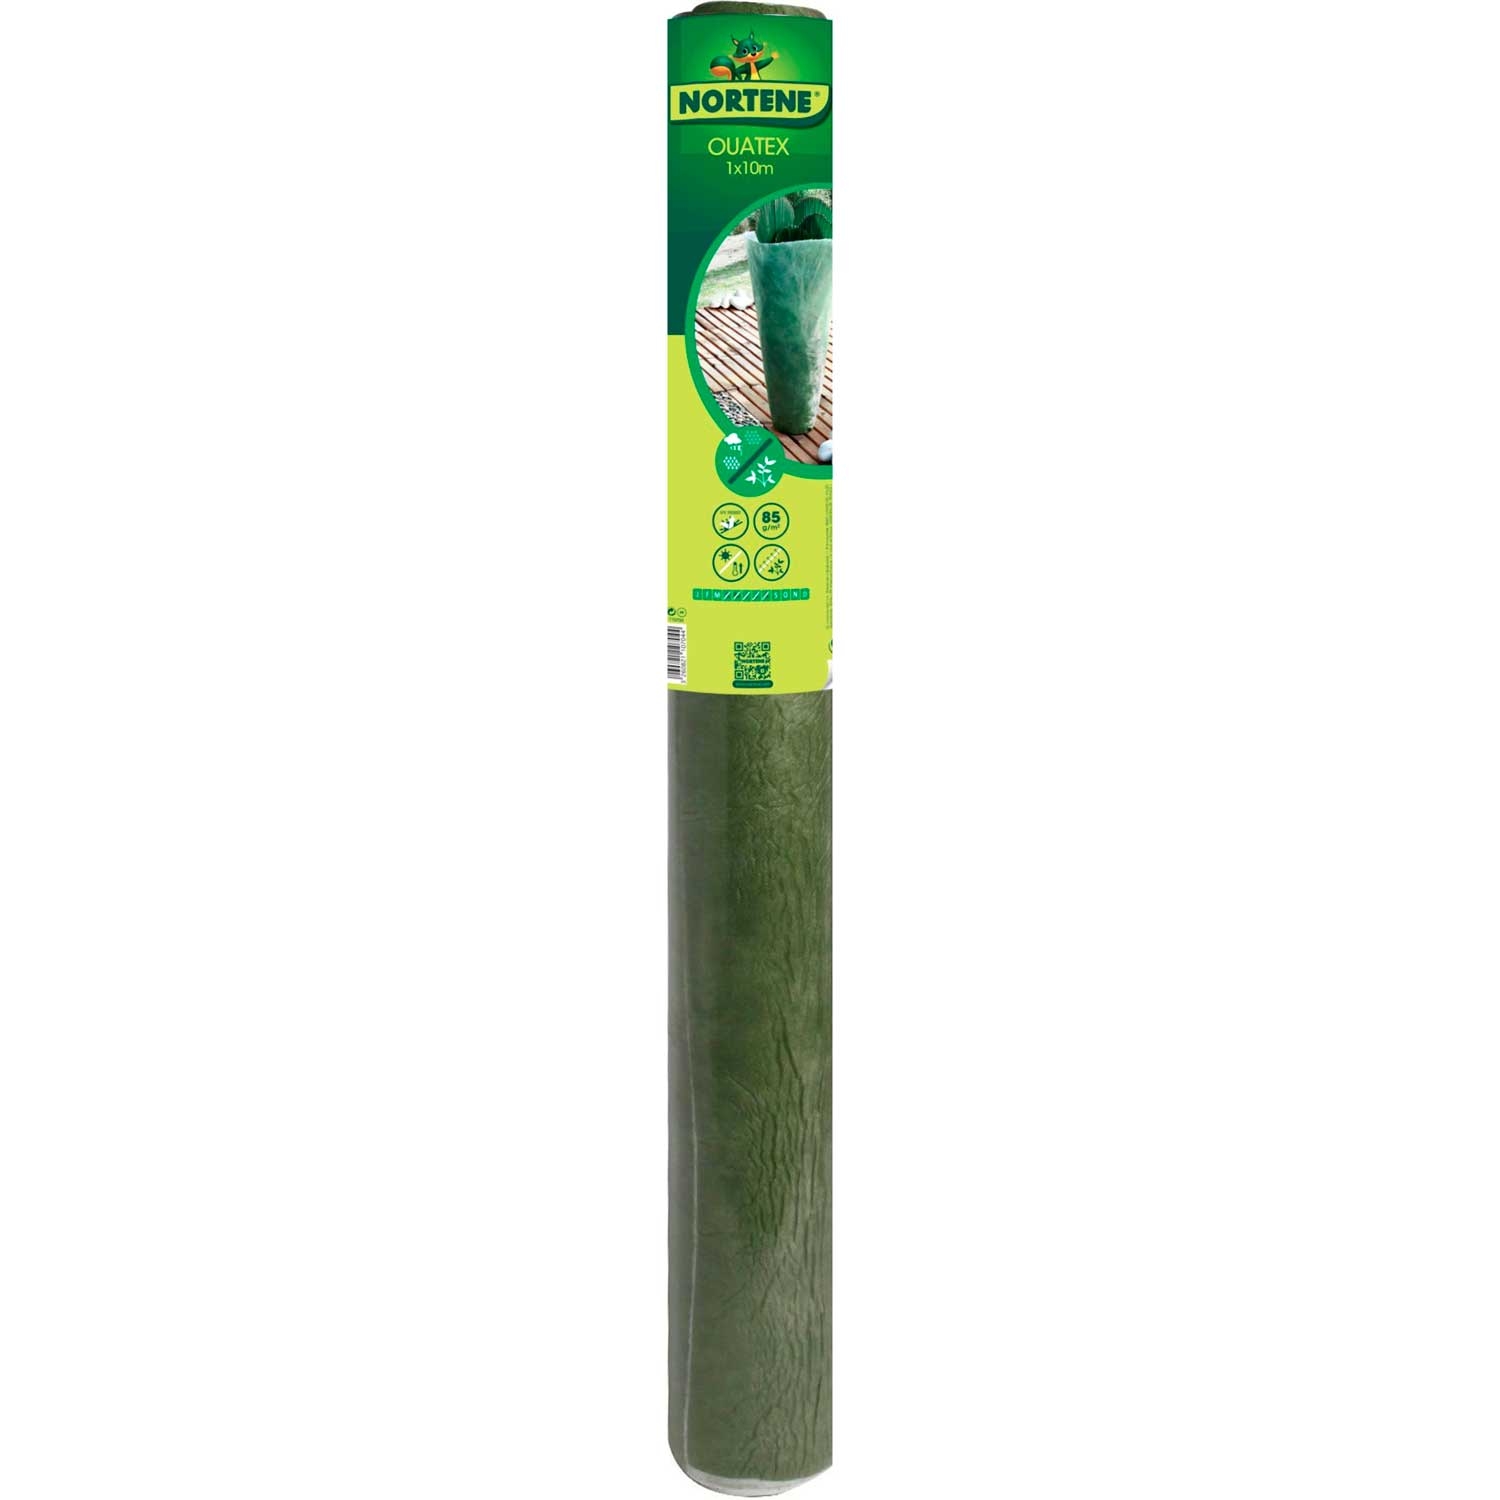 Protection hivernale double voile vert olive PP + ouate 85g 1 x 10 m OUATEX